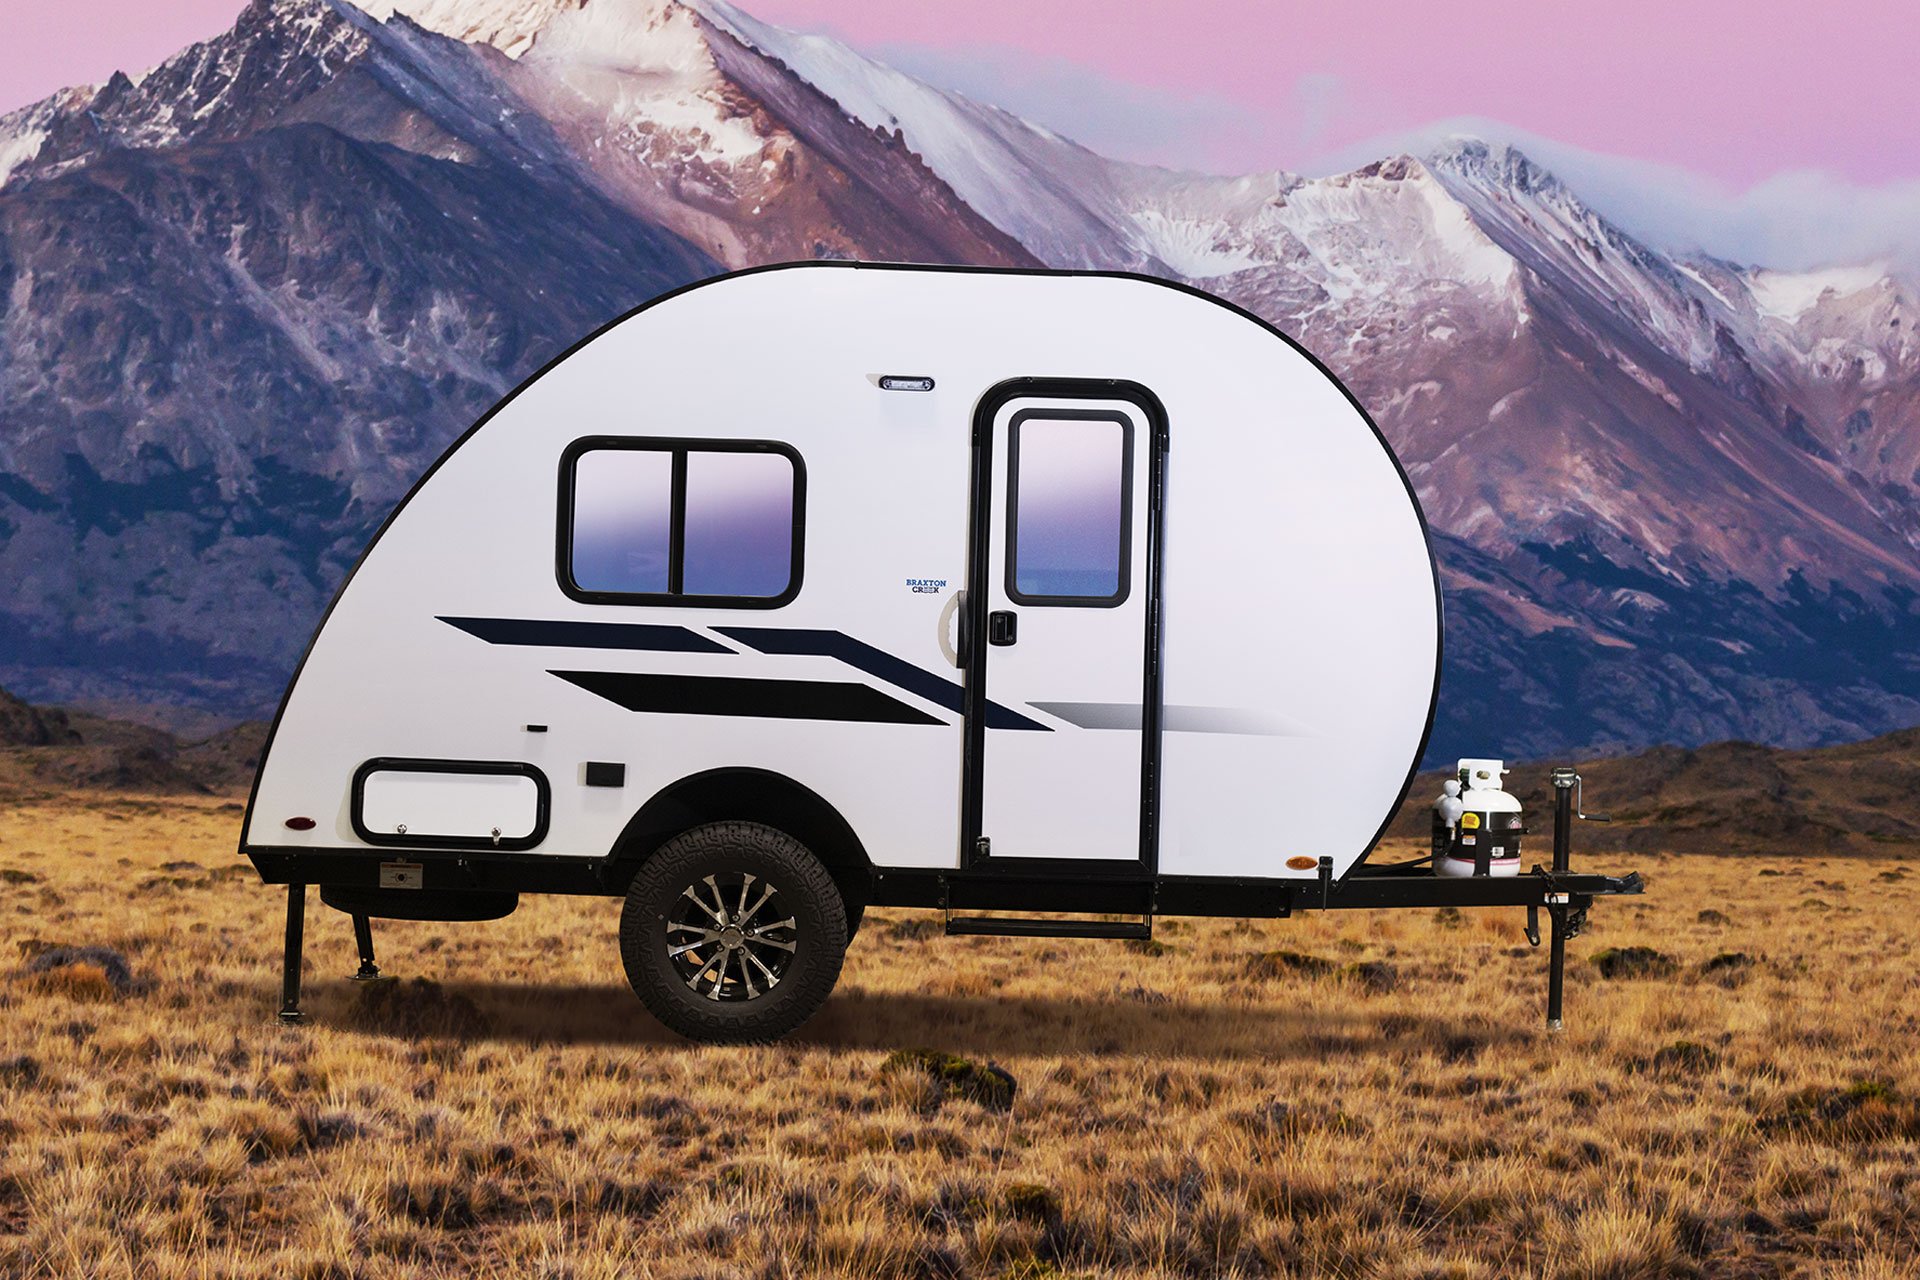 Bushwhacker Plus Camper by Braxton Creek: Unmatched in Price & Towability